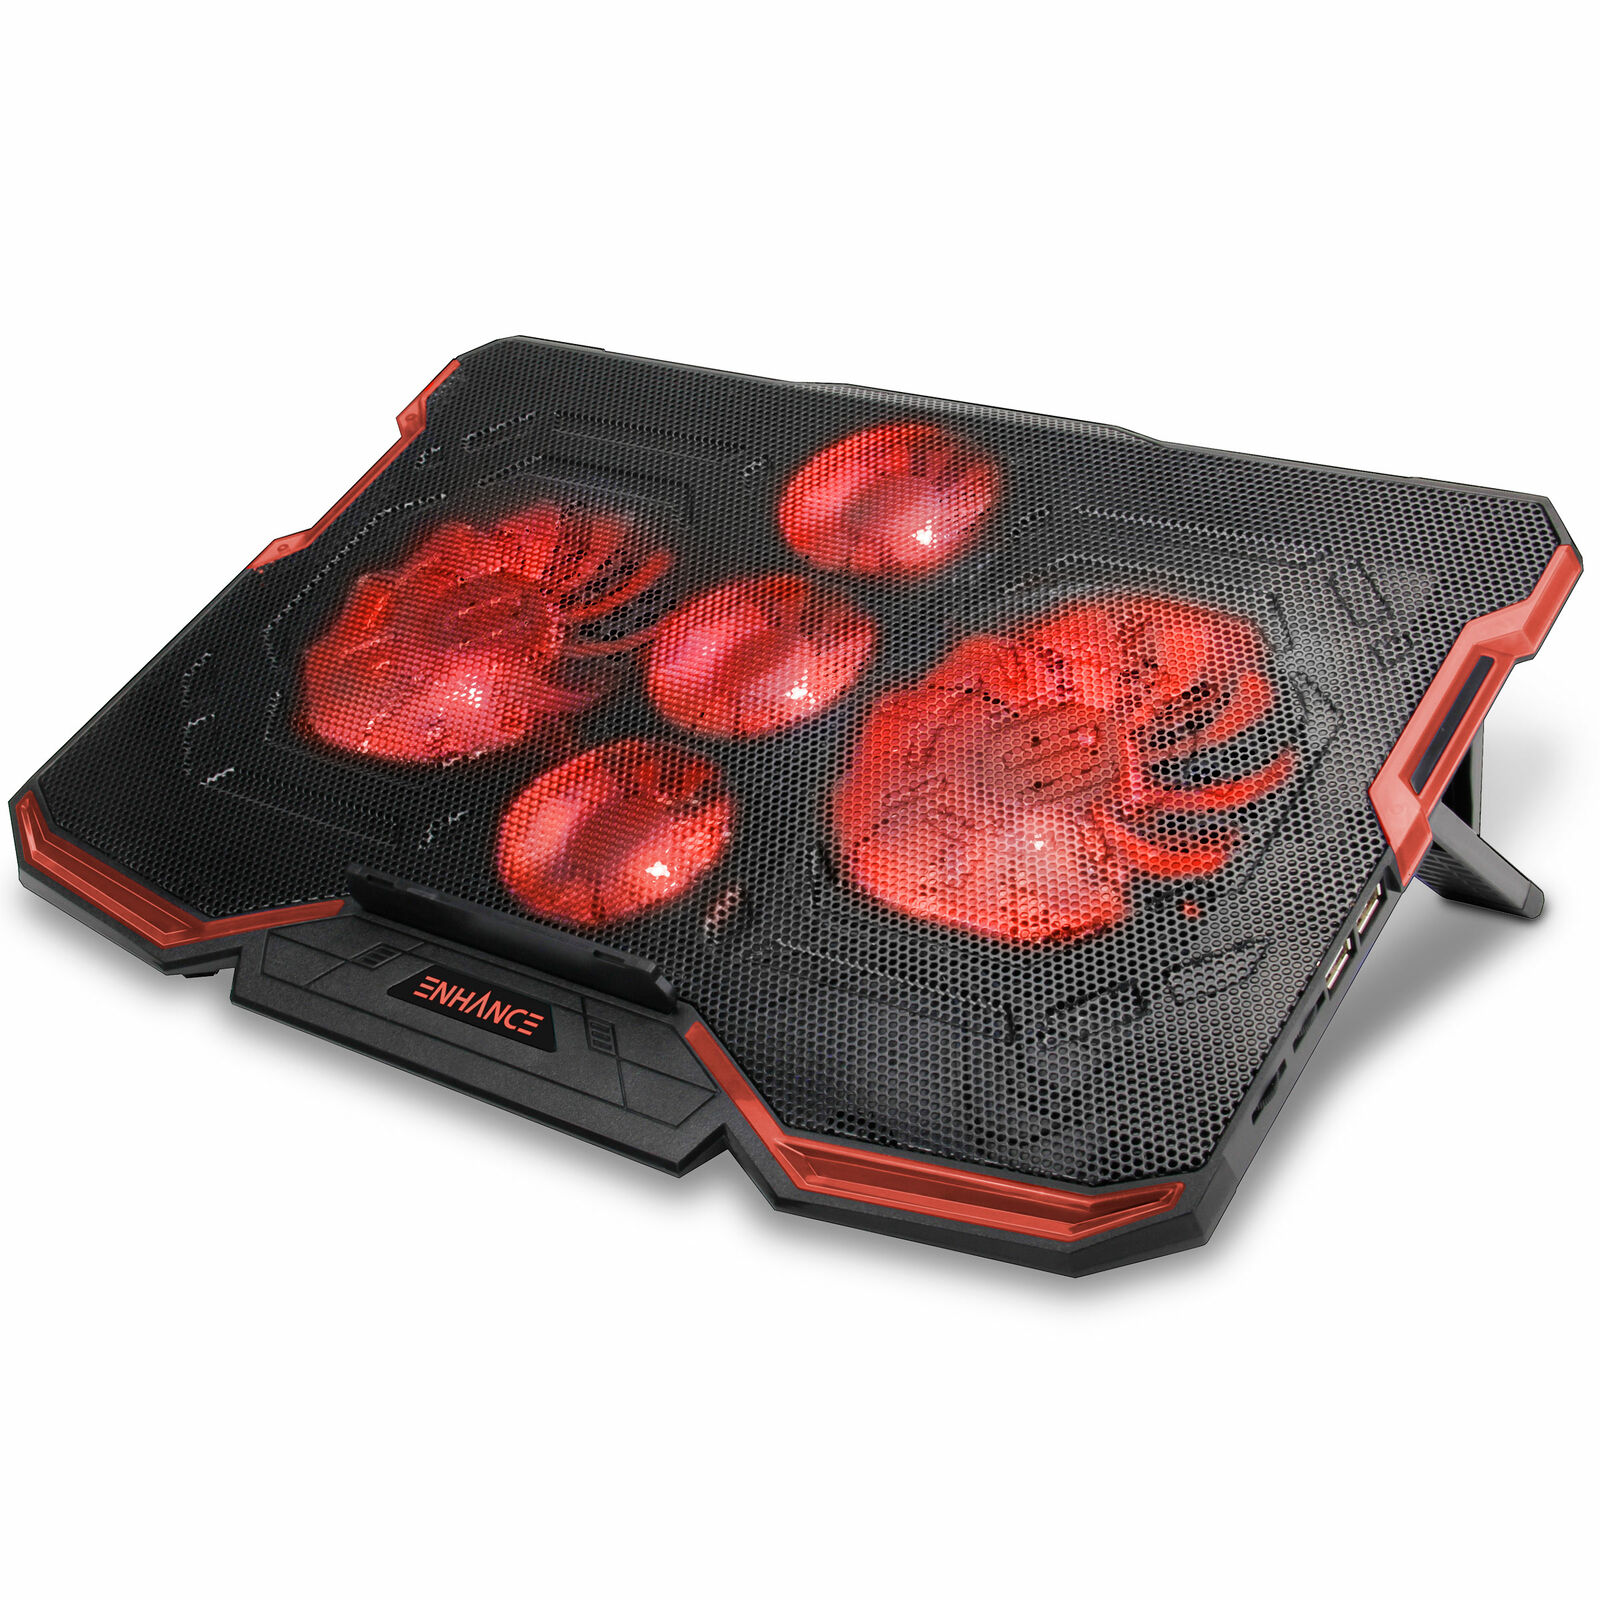 ENHANCE Cryogen Gaming Laptop Cooling Pad - 5 Quiet Cooler Fans and 2 USB Ports